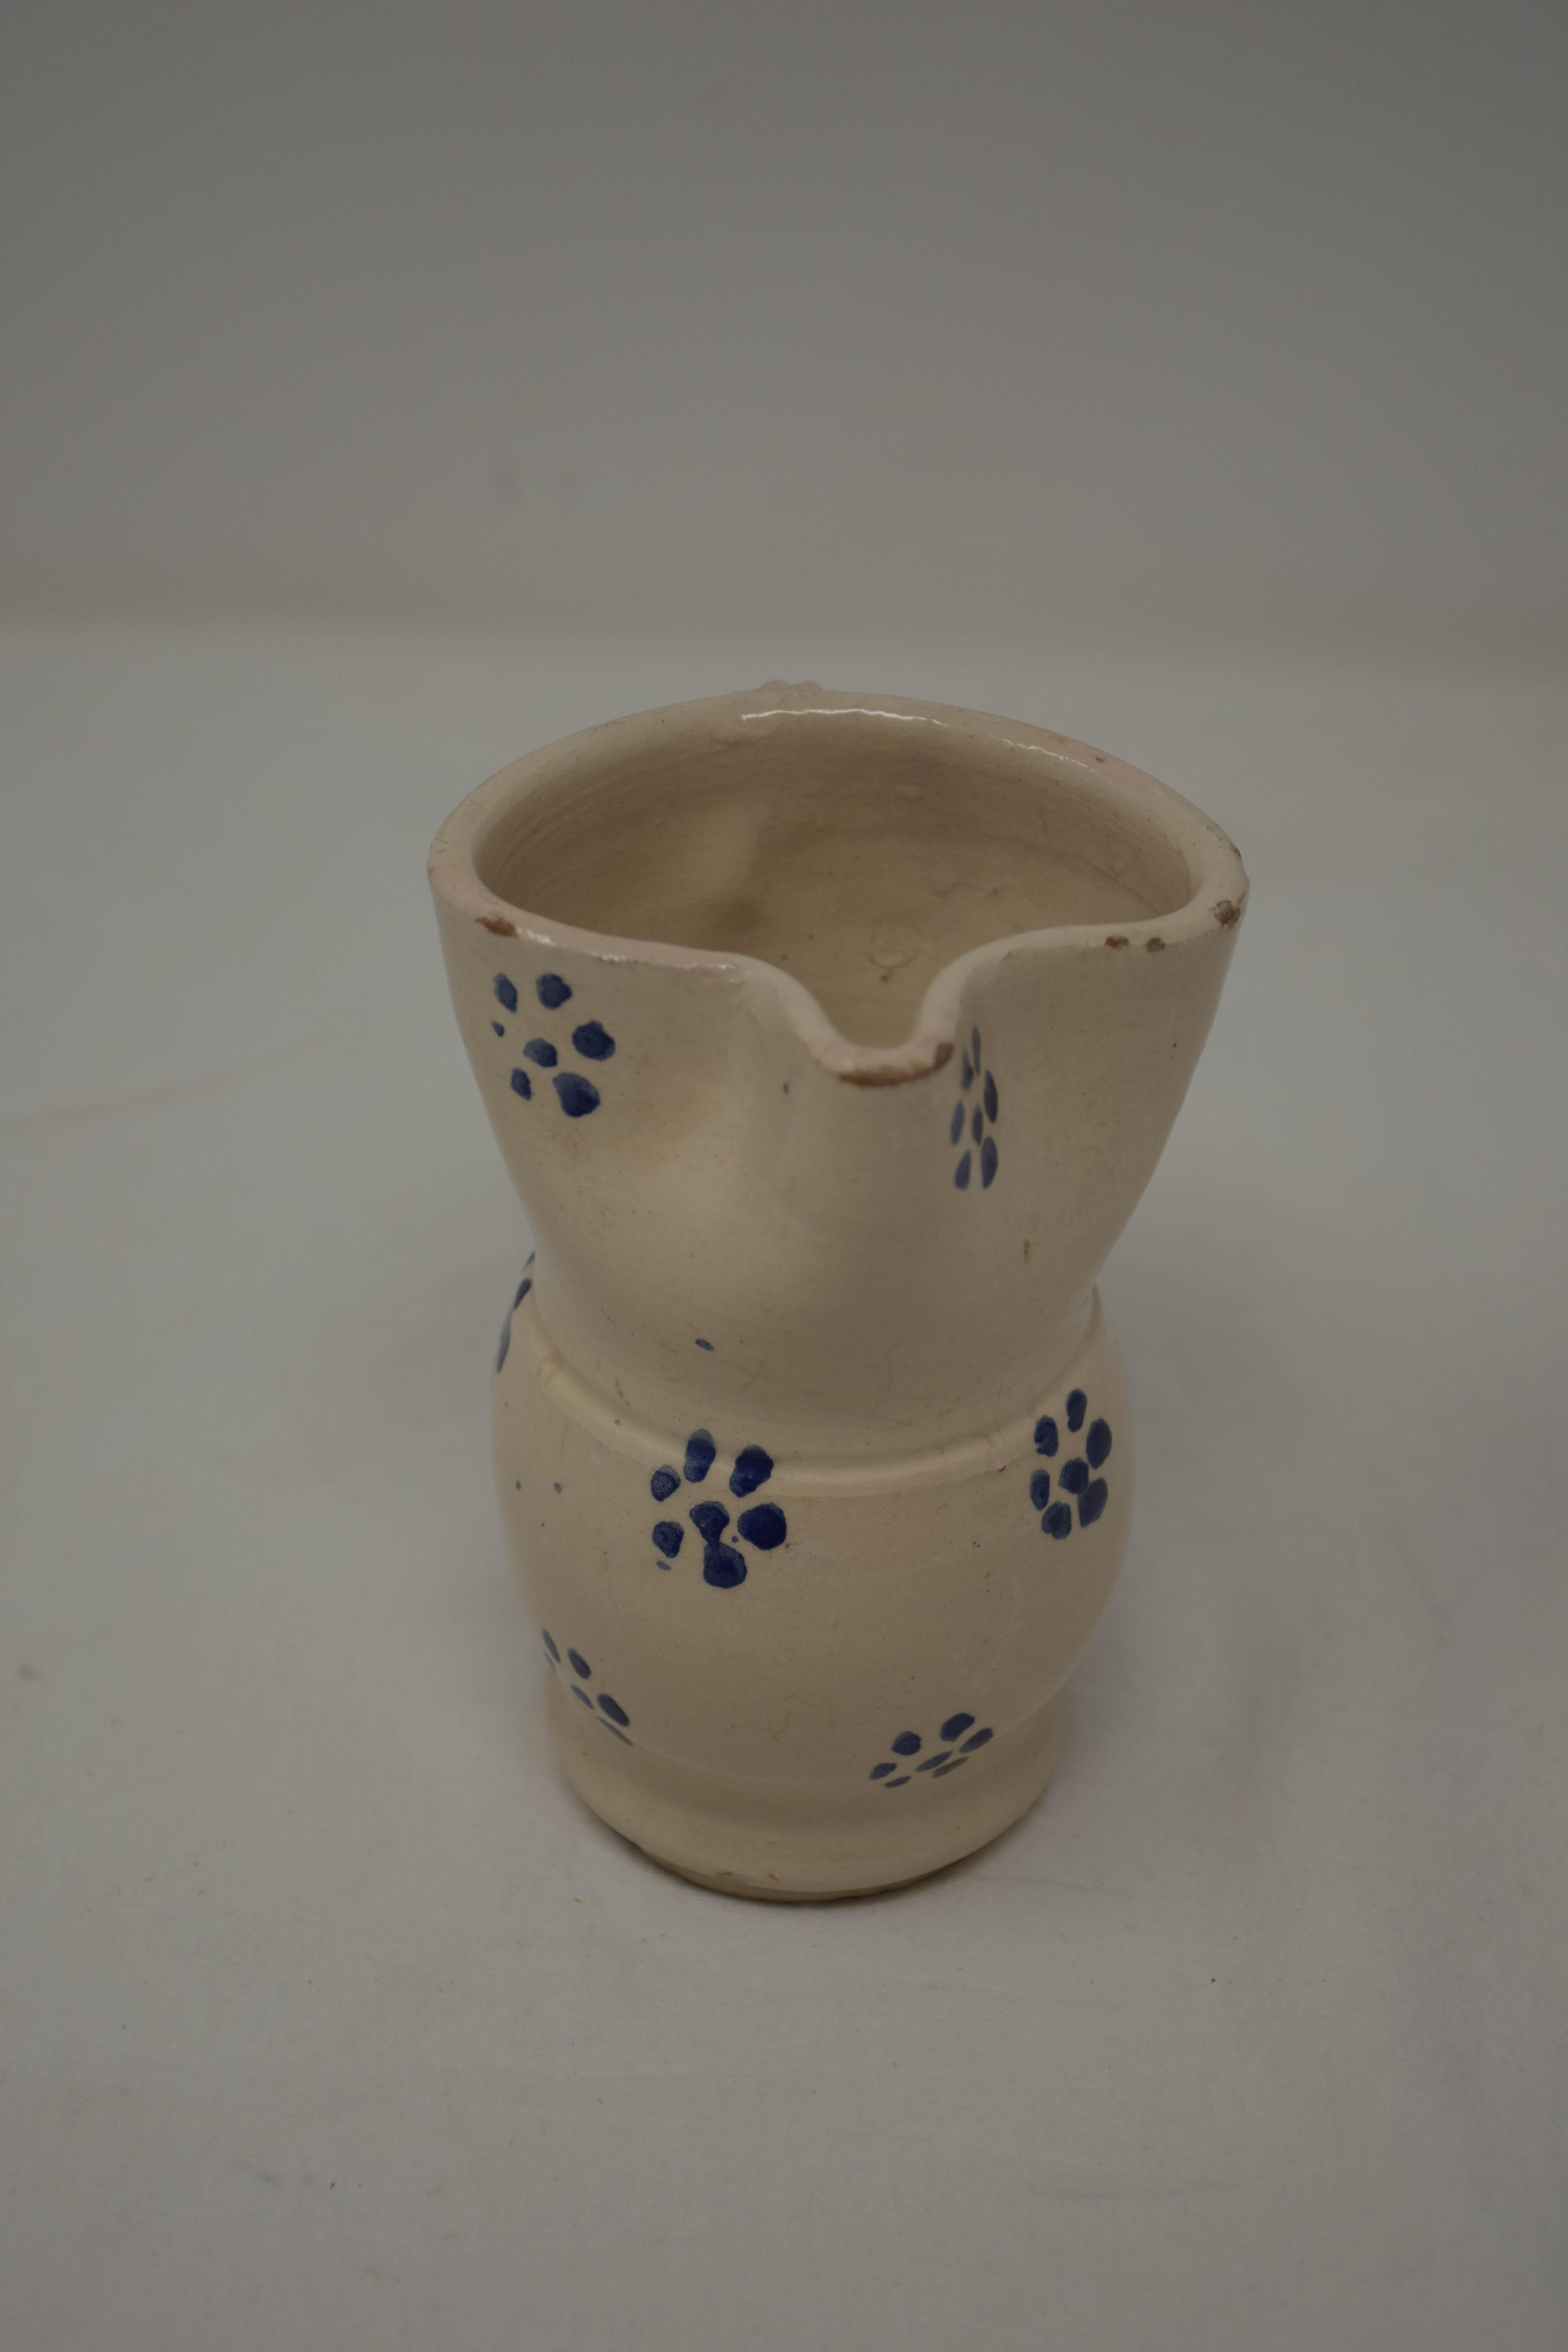 Charming vintage Italian traditional pottery from Apulia 